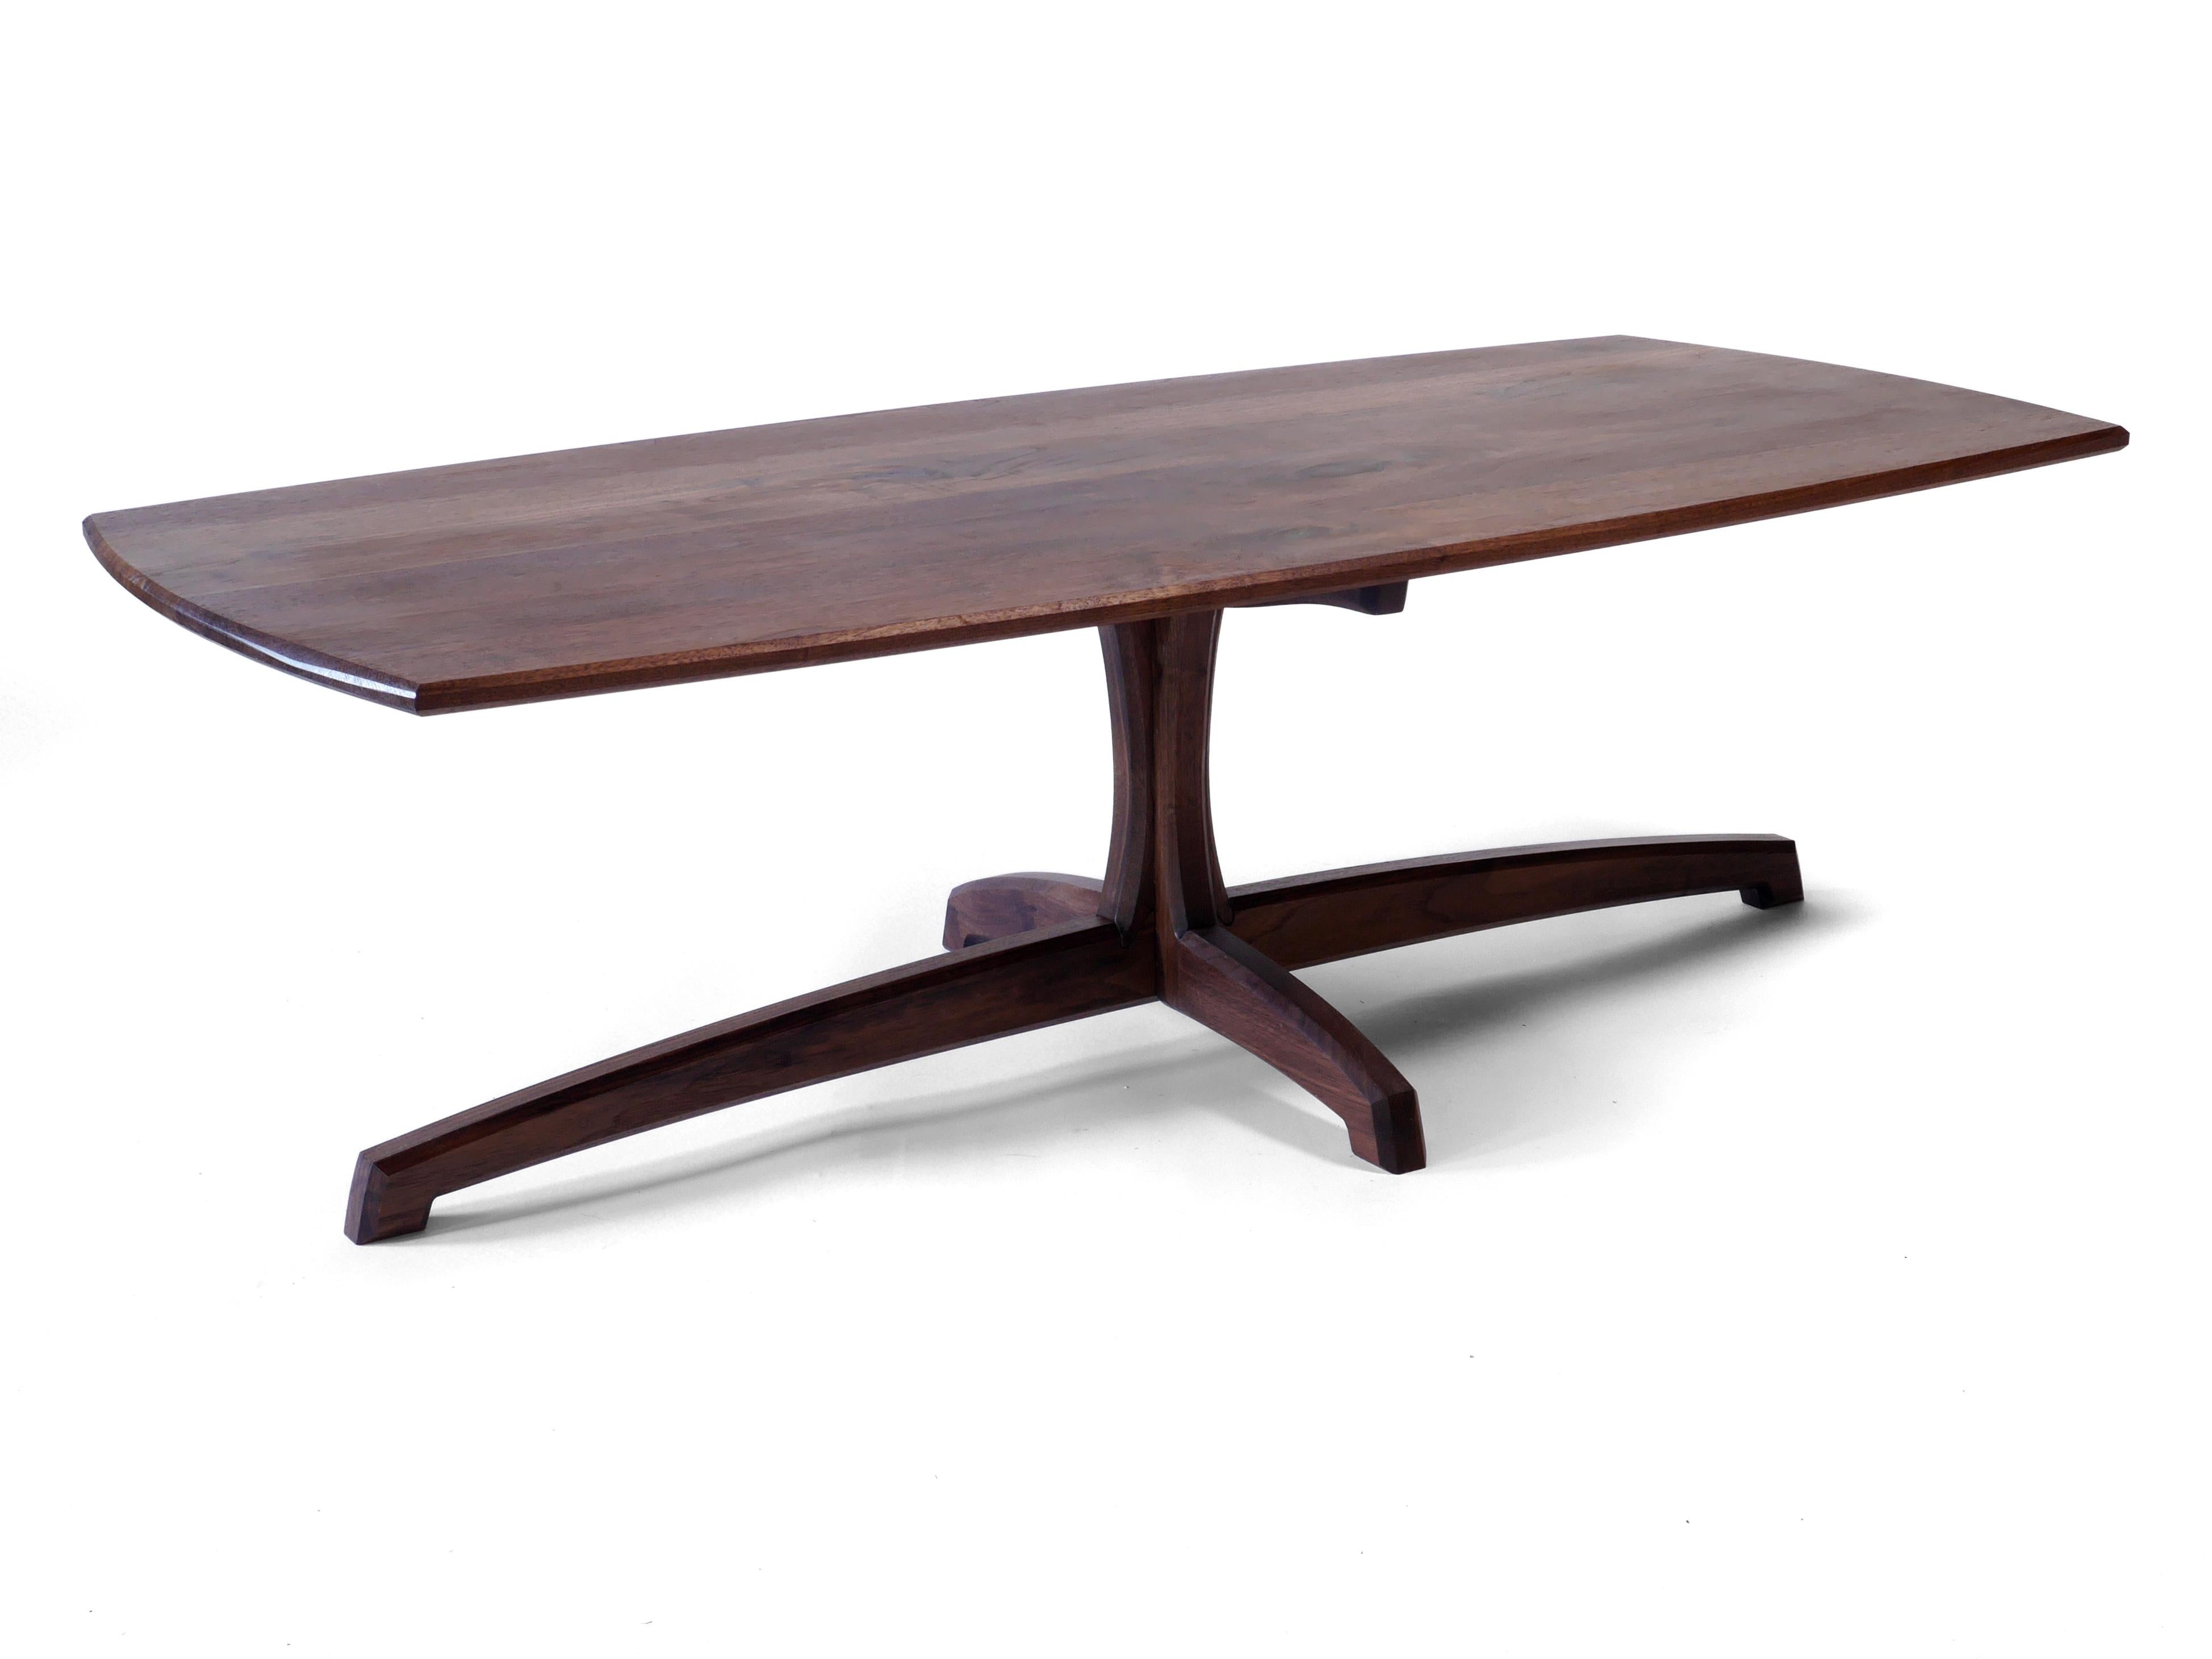 Walnut Plume Coffee Table, Contemporary Pedestal Living Room Table by Arid